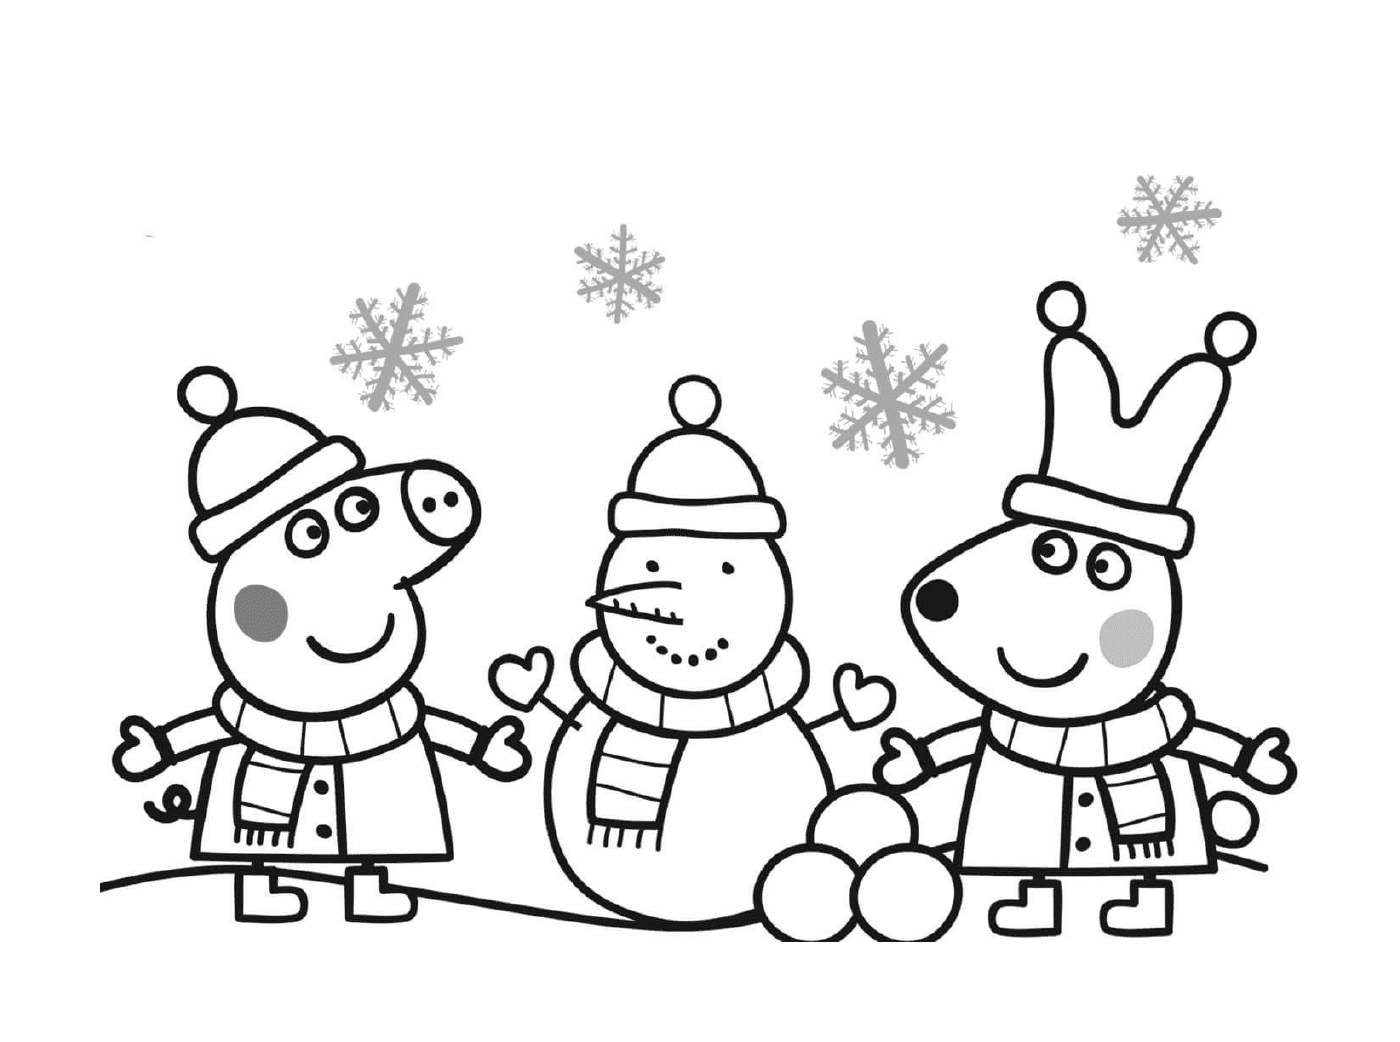  Peppa Pig celebrates Christmas with a snowman 